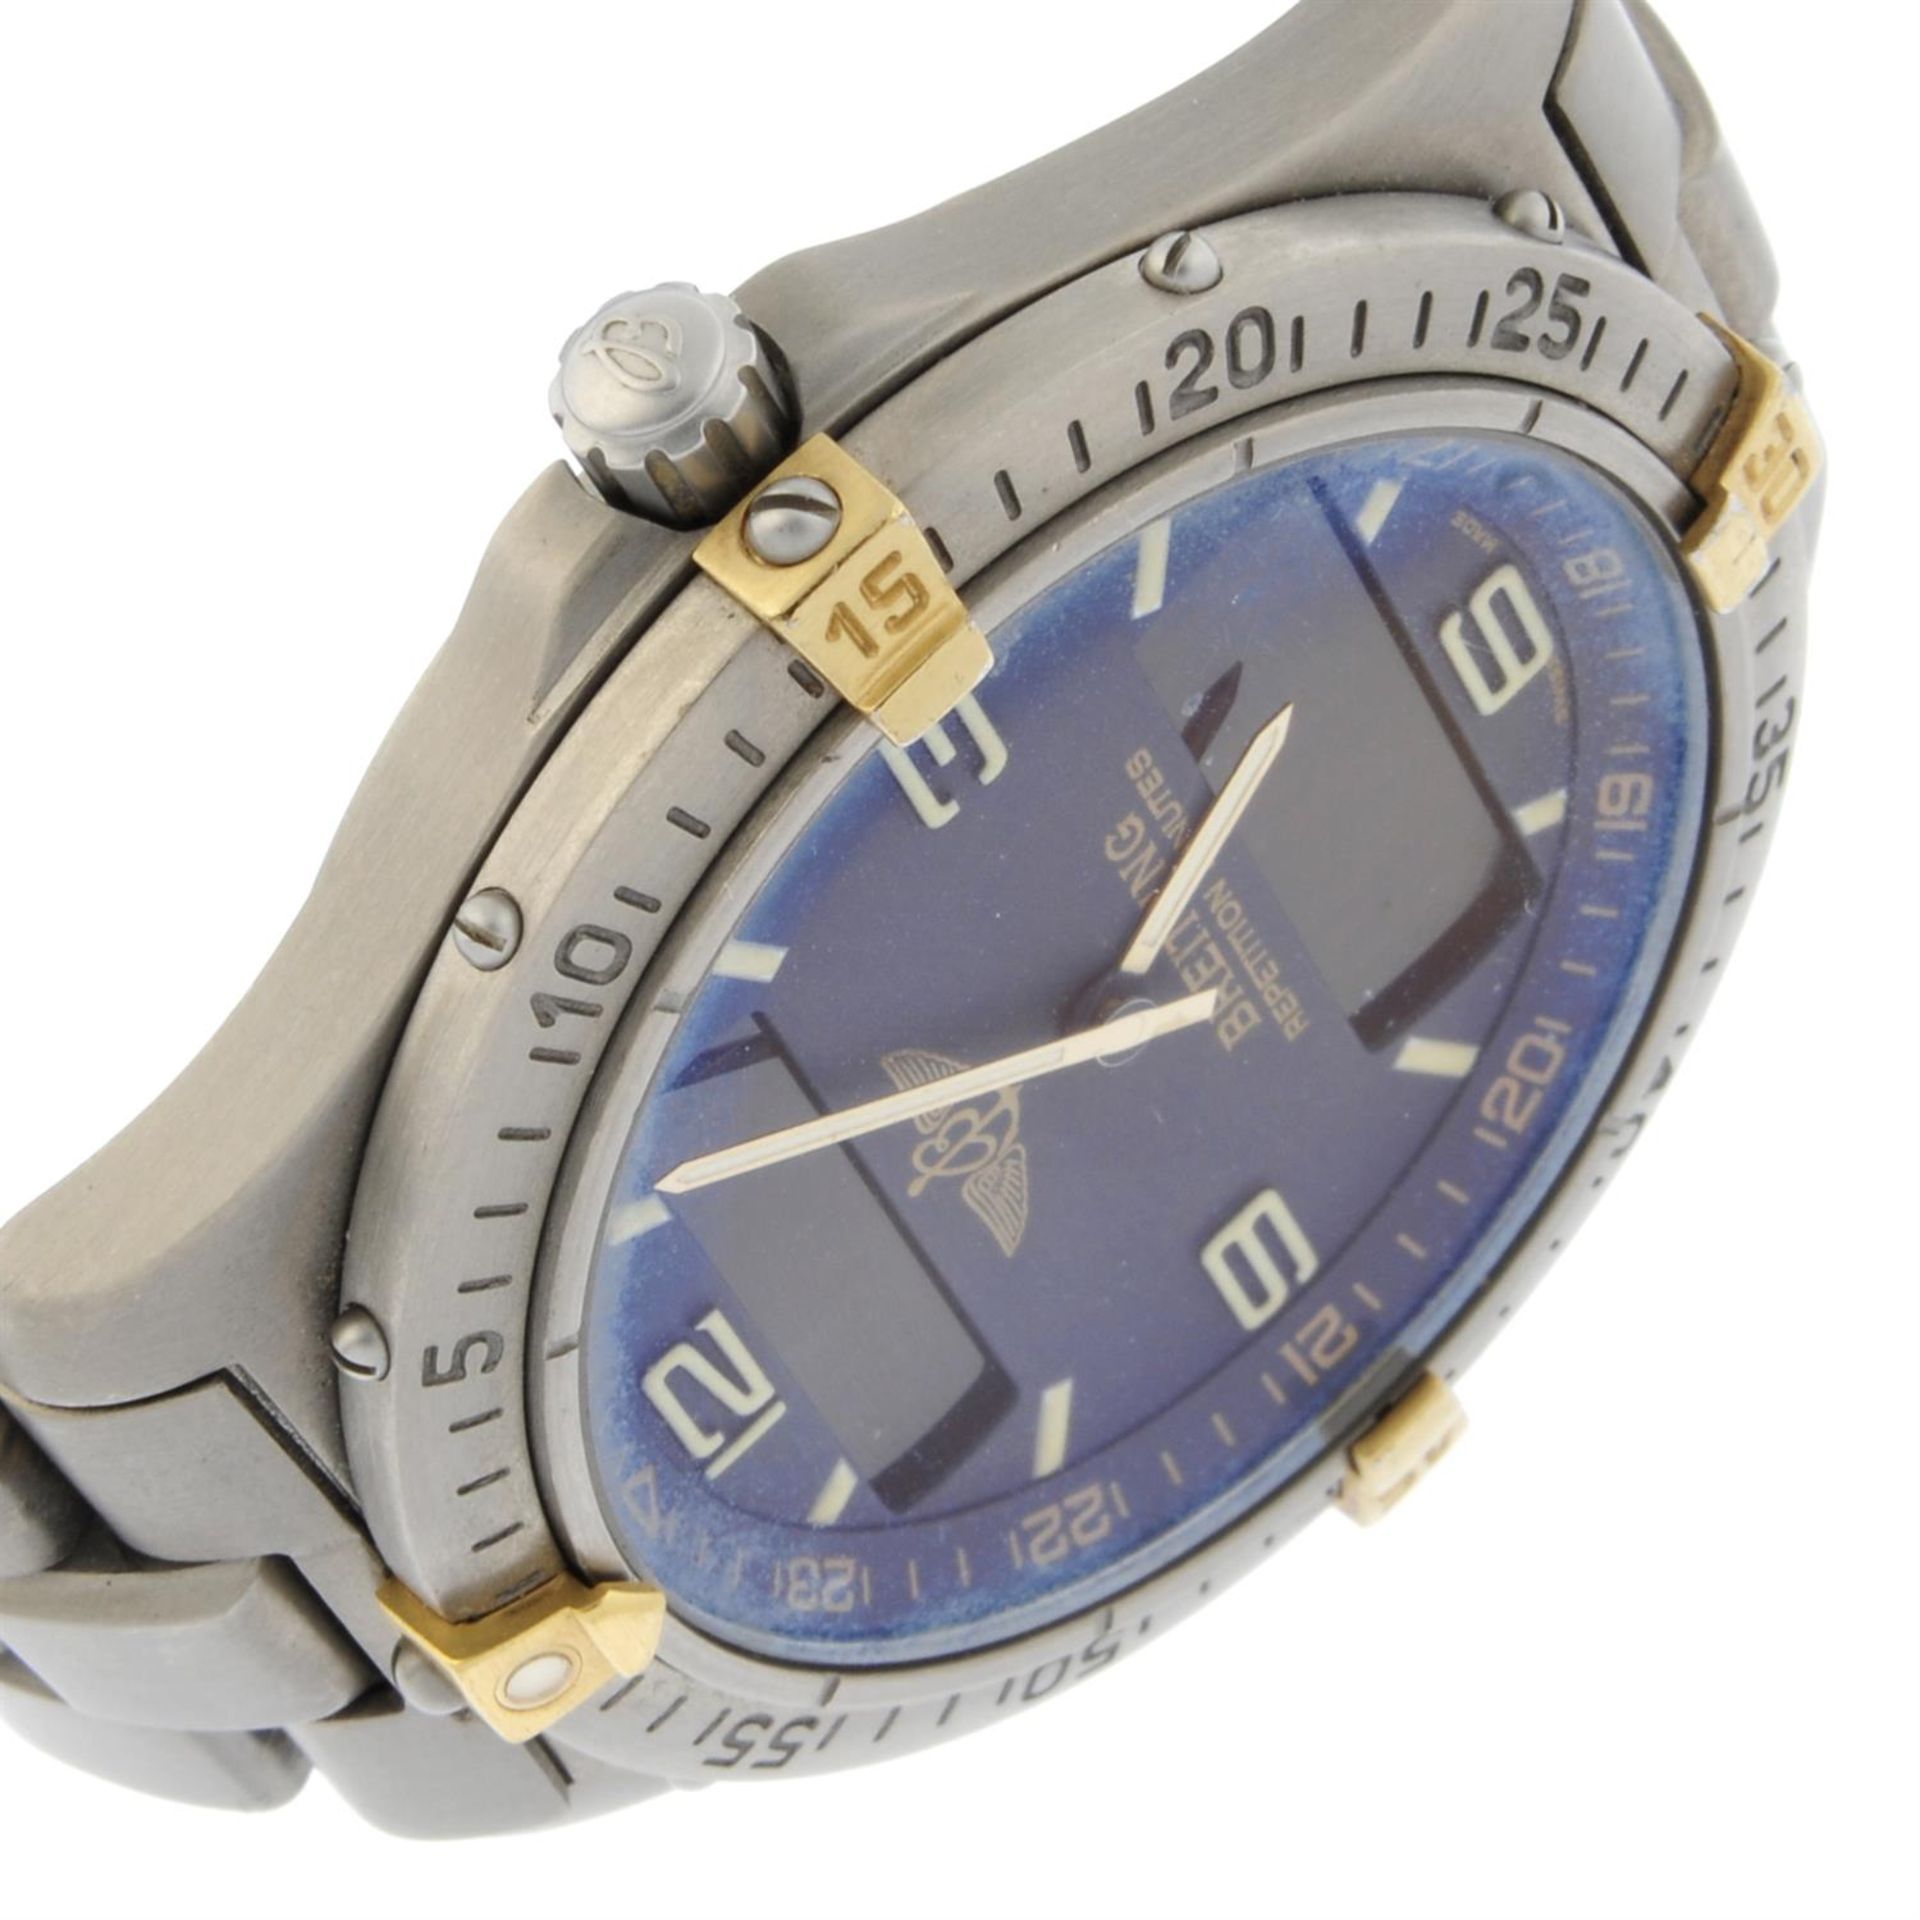 Breitling - an Aerospace watch, 40mm. - Image 3 of 5